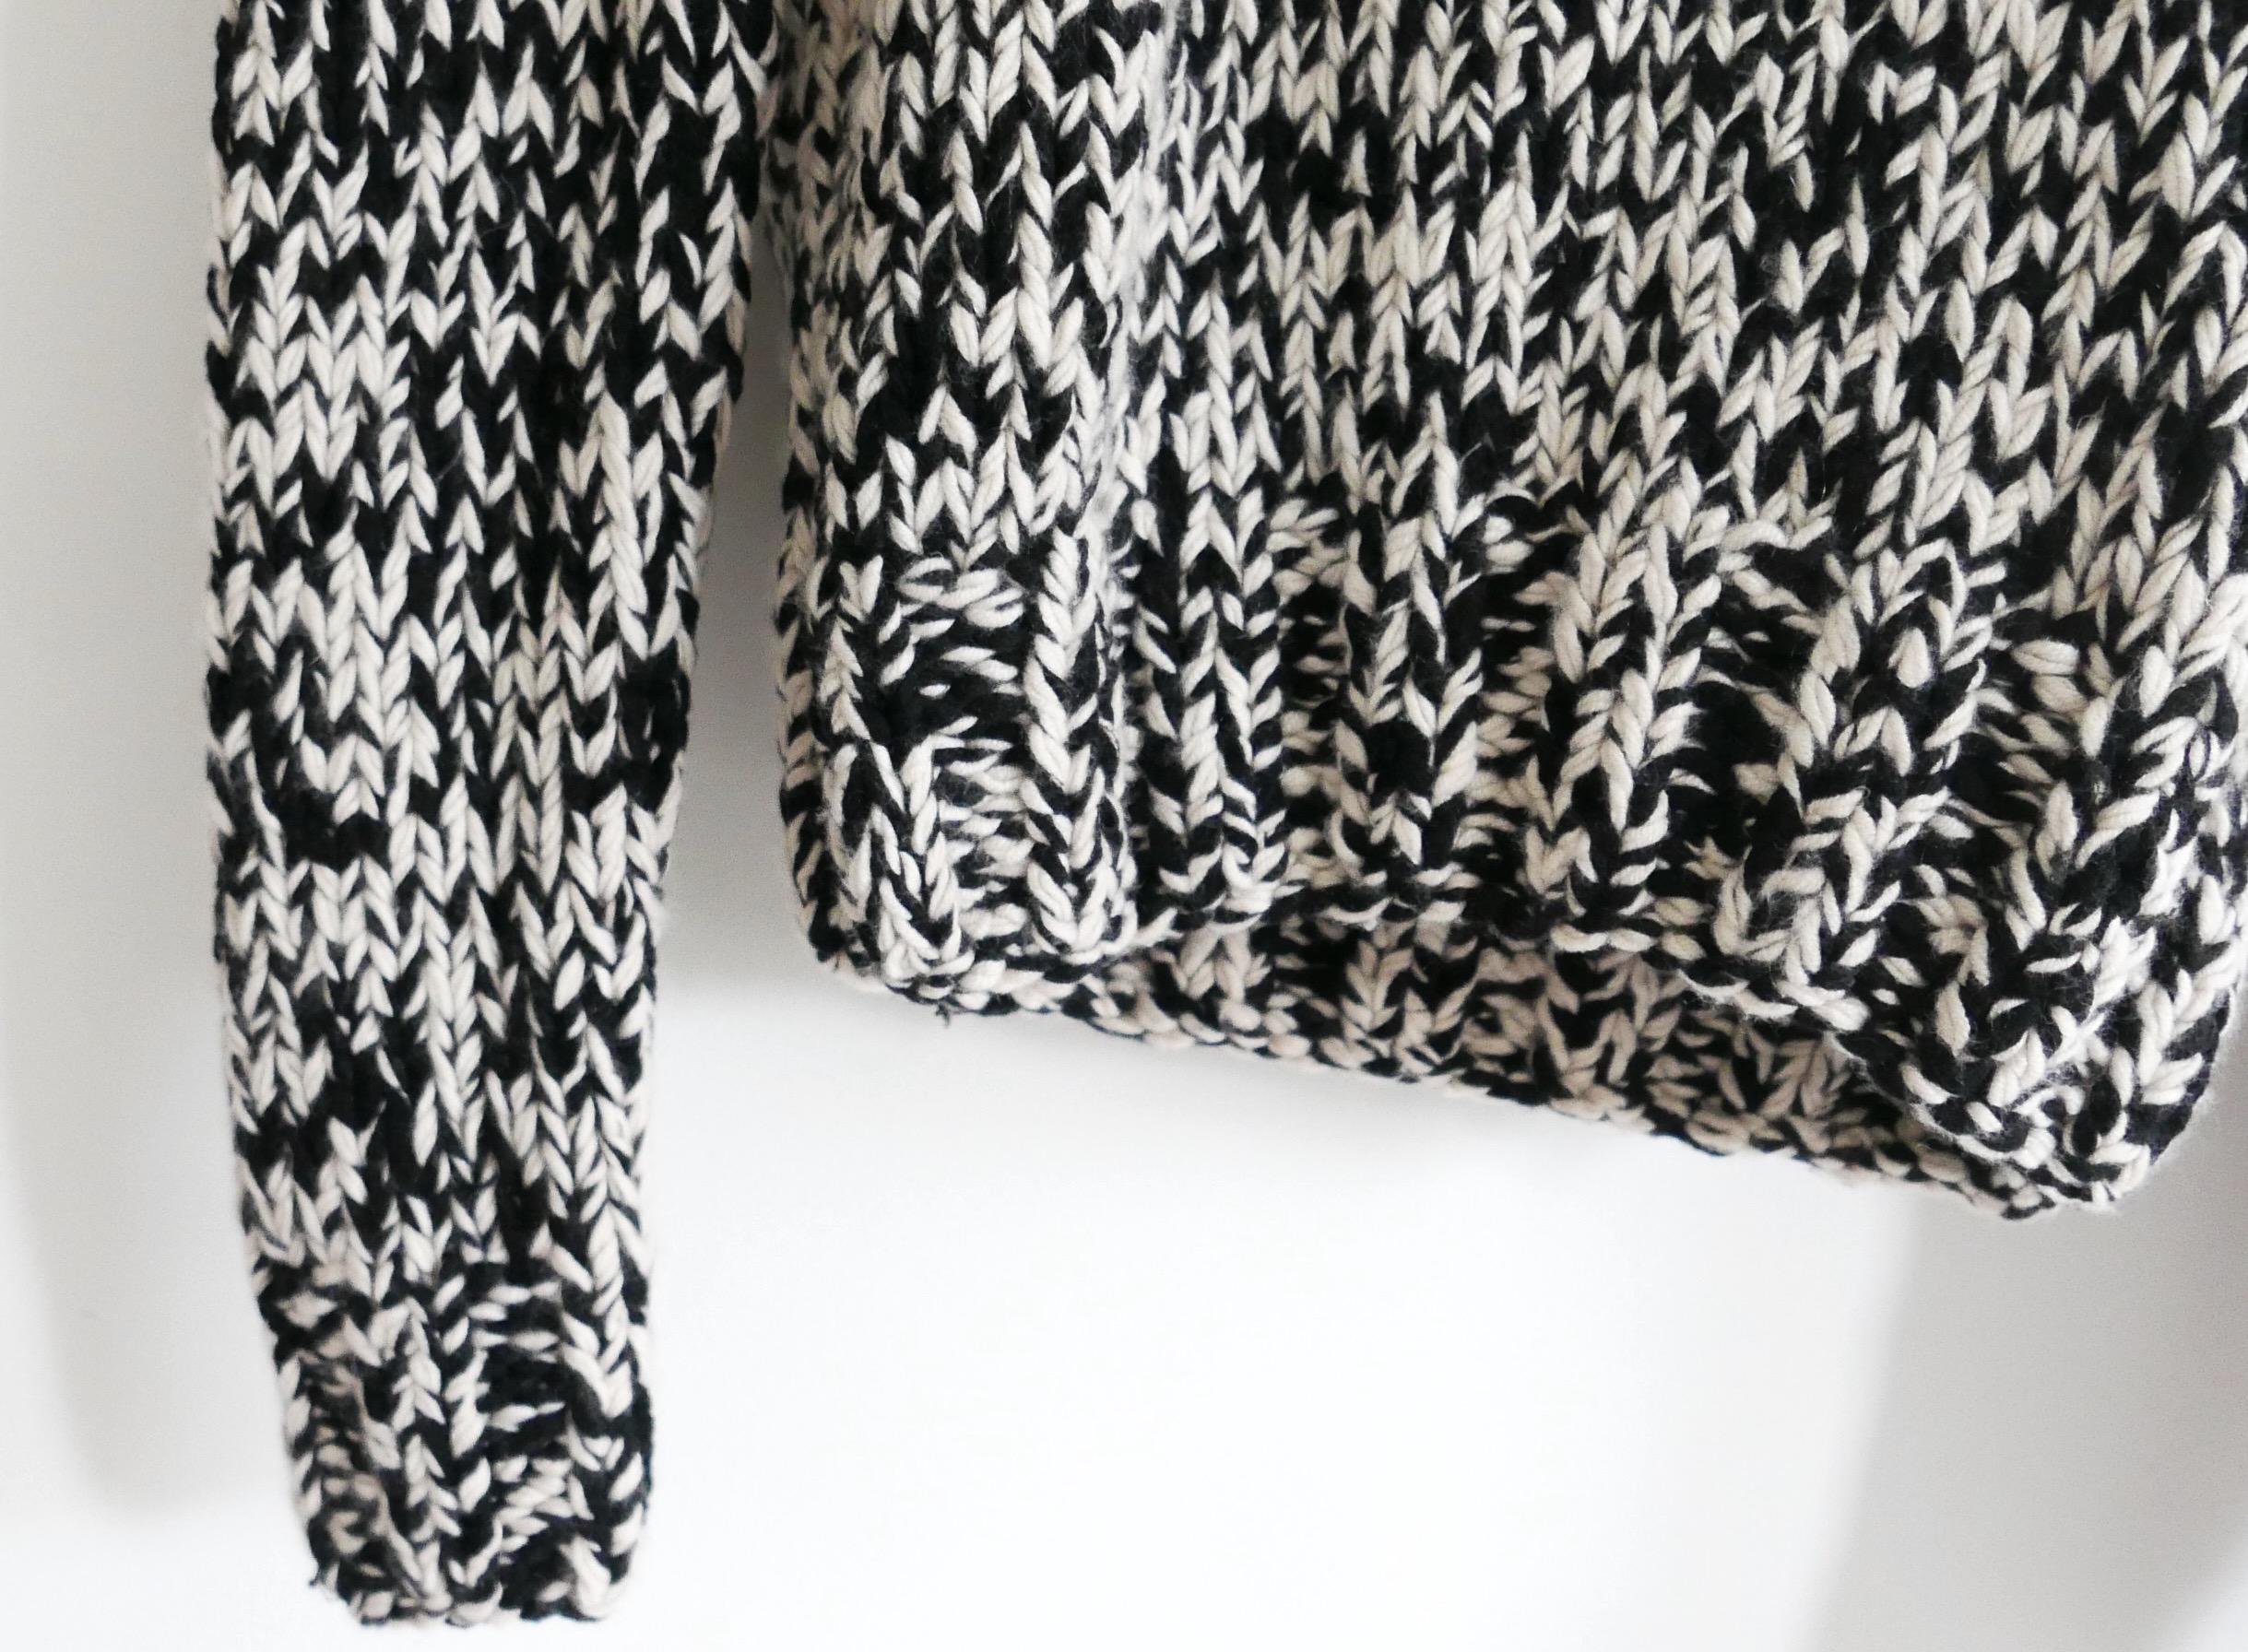 Cool and super rare, new with tags Celine cashmere jumper. From the Fall 1999 collection when Michael Kors was at the label. Made from chunky, soft black and white marled cashmere with ribbed trims. It has roomy hood and curved hemline. Size S.